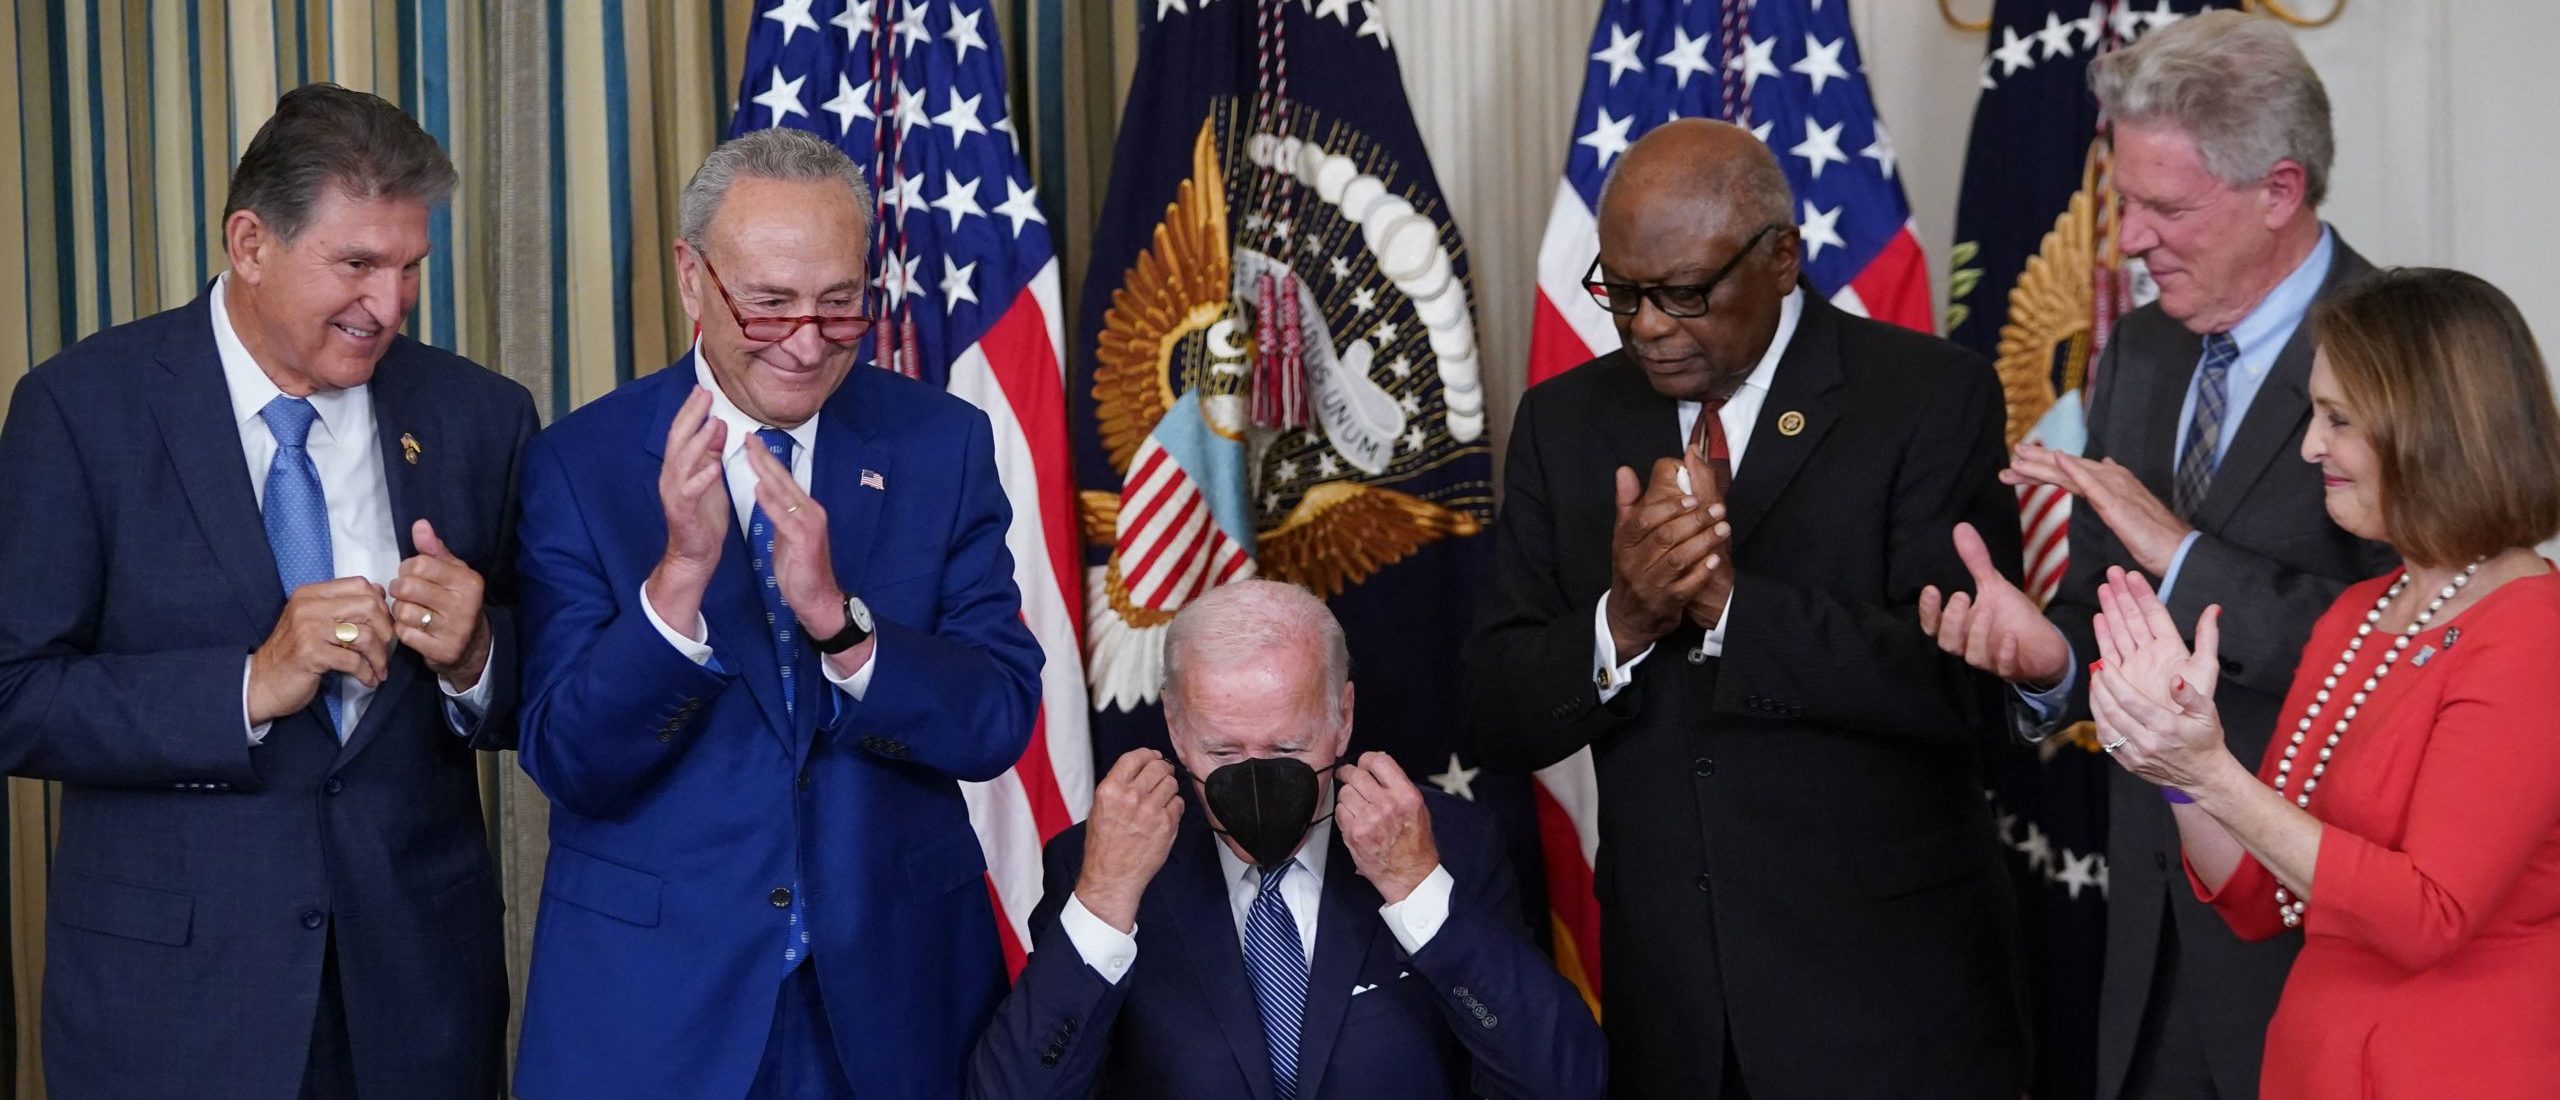 US President Joe Biden puts on his mask after signing H.R. 5376, the Inflation Reduction Act of 2022, in the State Dining Room of the White House in Washington, DC on August 16, 2022. (Photo by MANDEL NGAN/AFP via Getty Images)